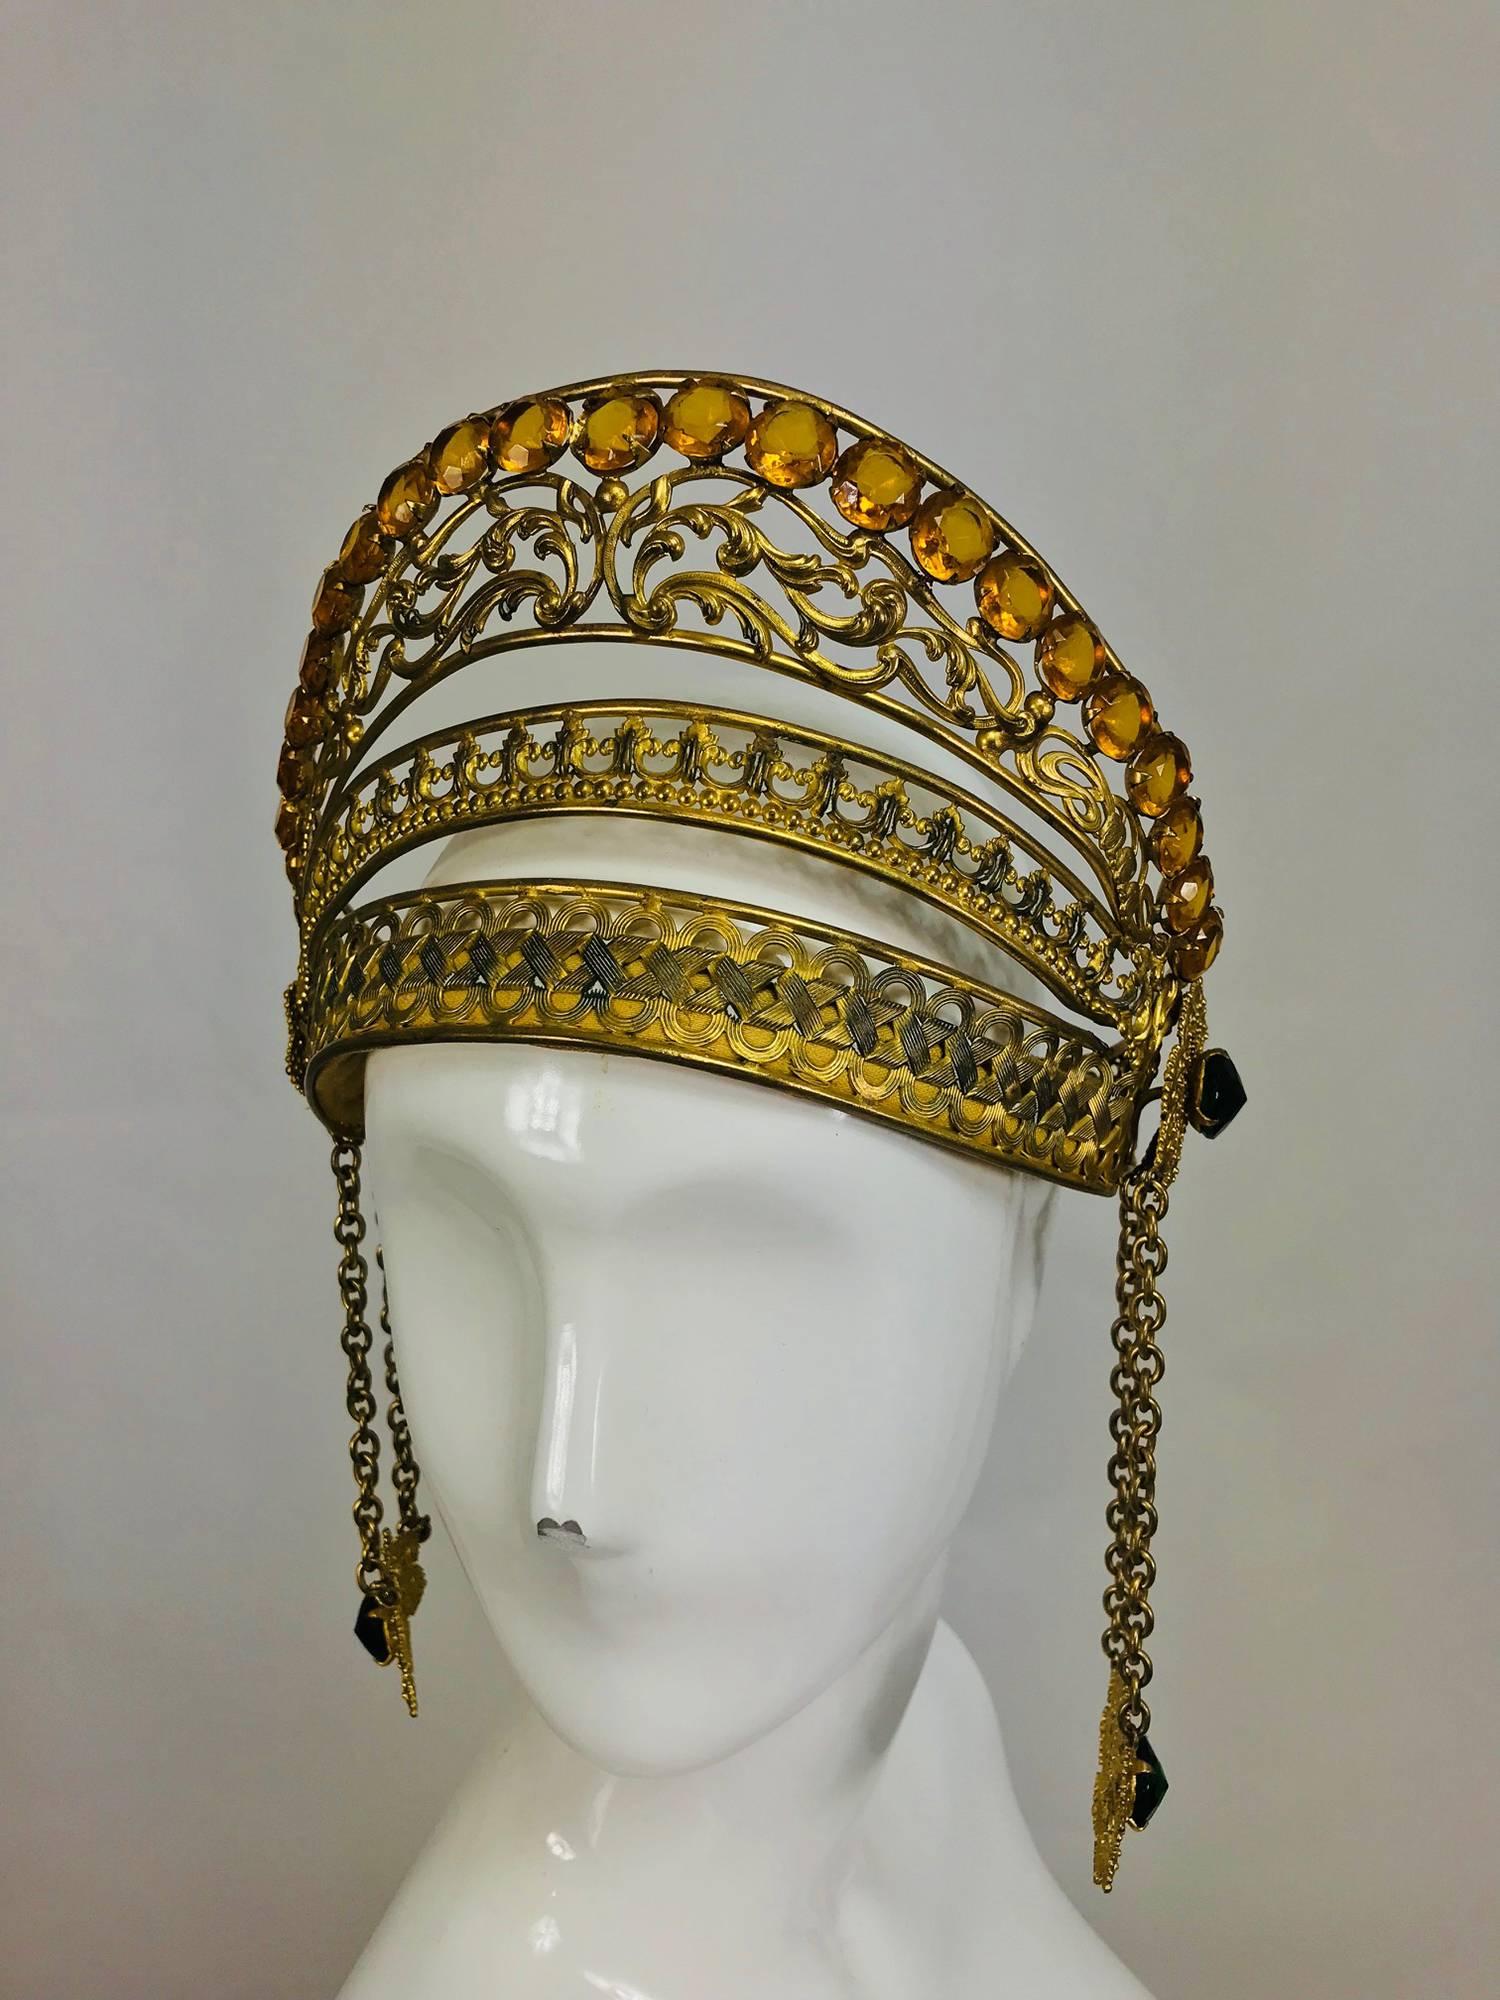 Rare Crown or headdress from the early 1900s, constructed of embossed, cut out and woven gilt metal, the top is set with amber cut faceted jewels...At each side are gold filigree disks set with faceted green stones, hung below are chains, the